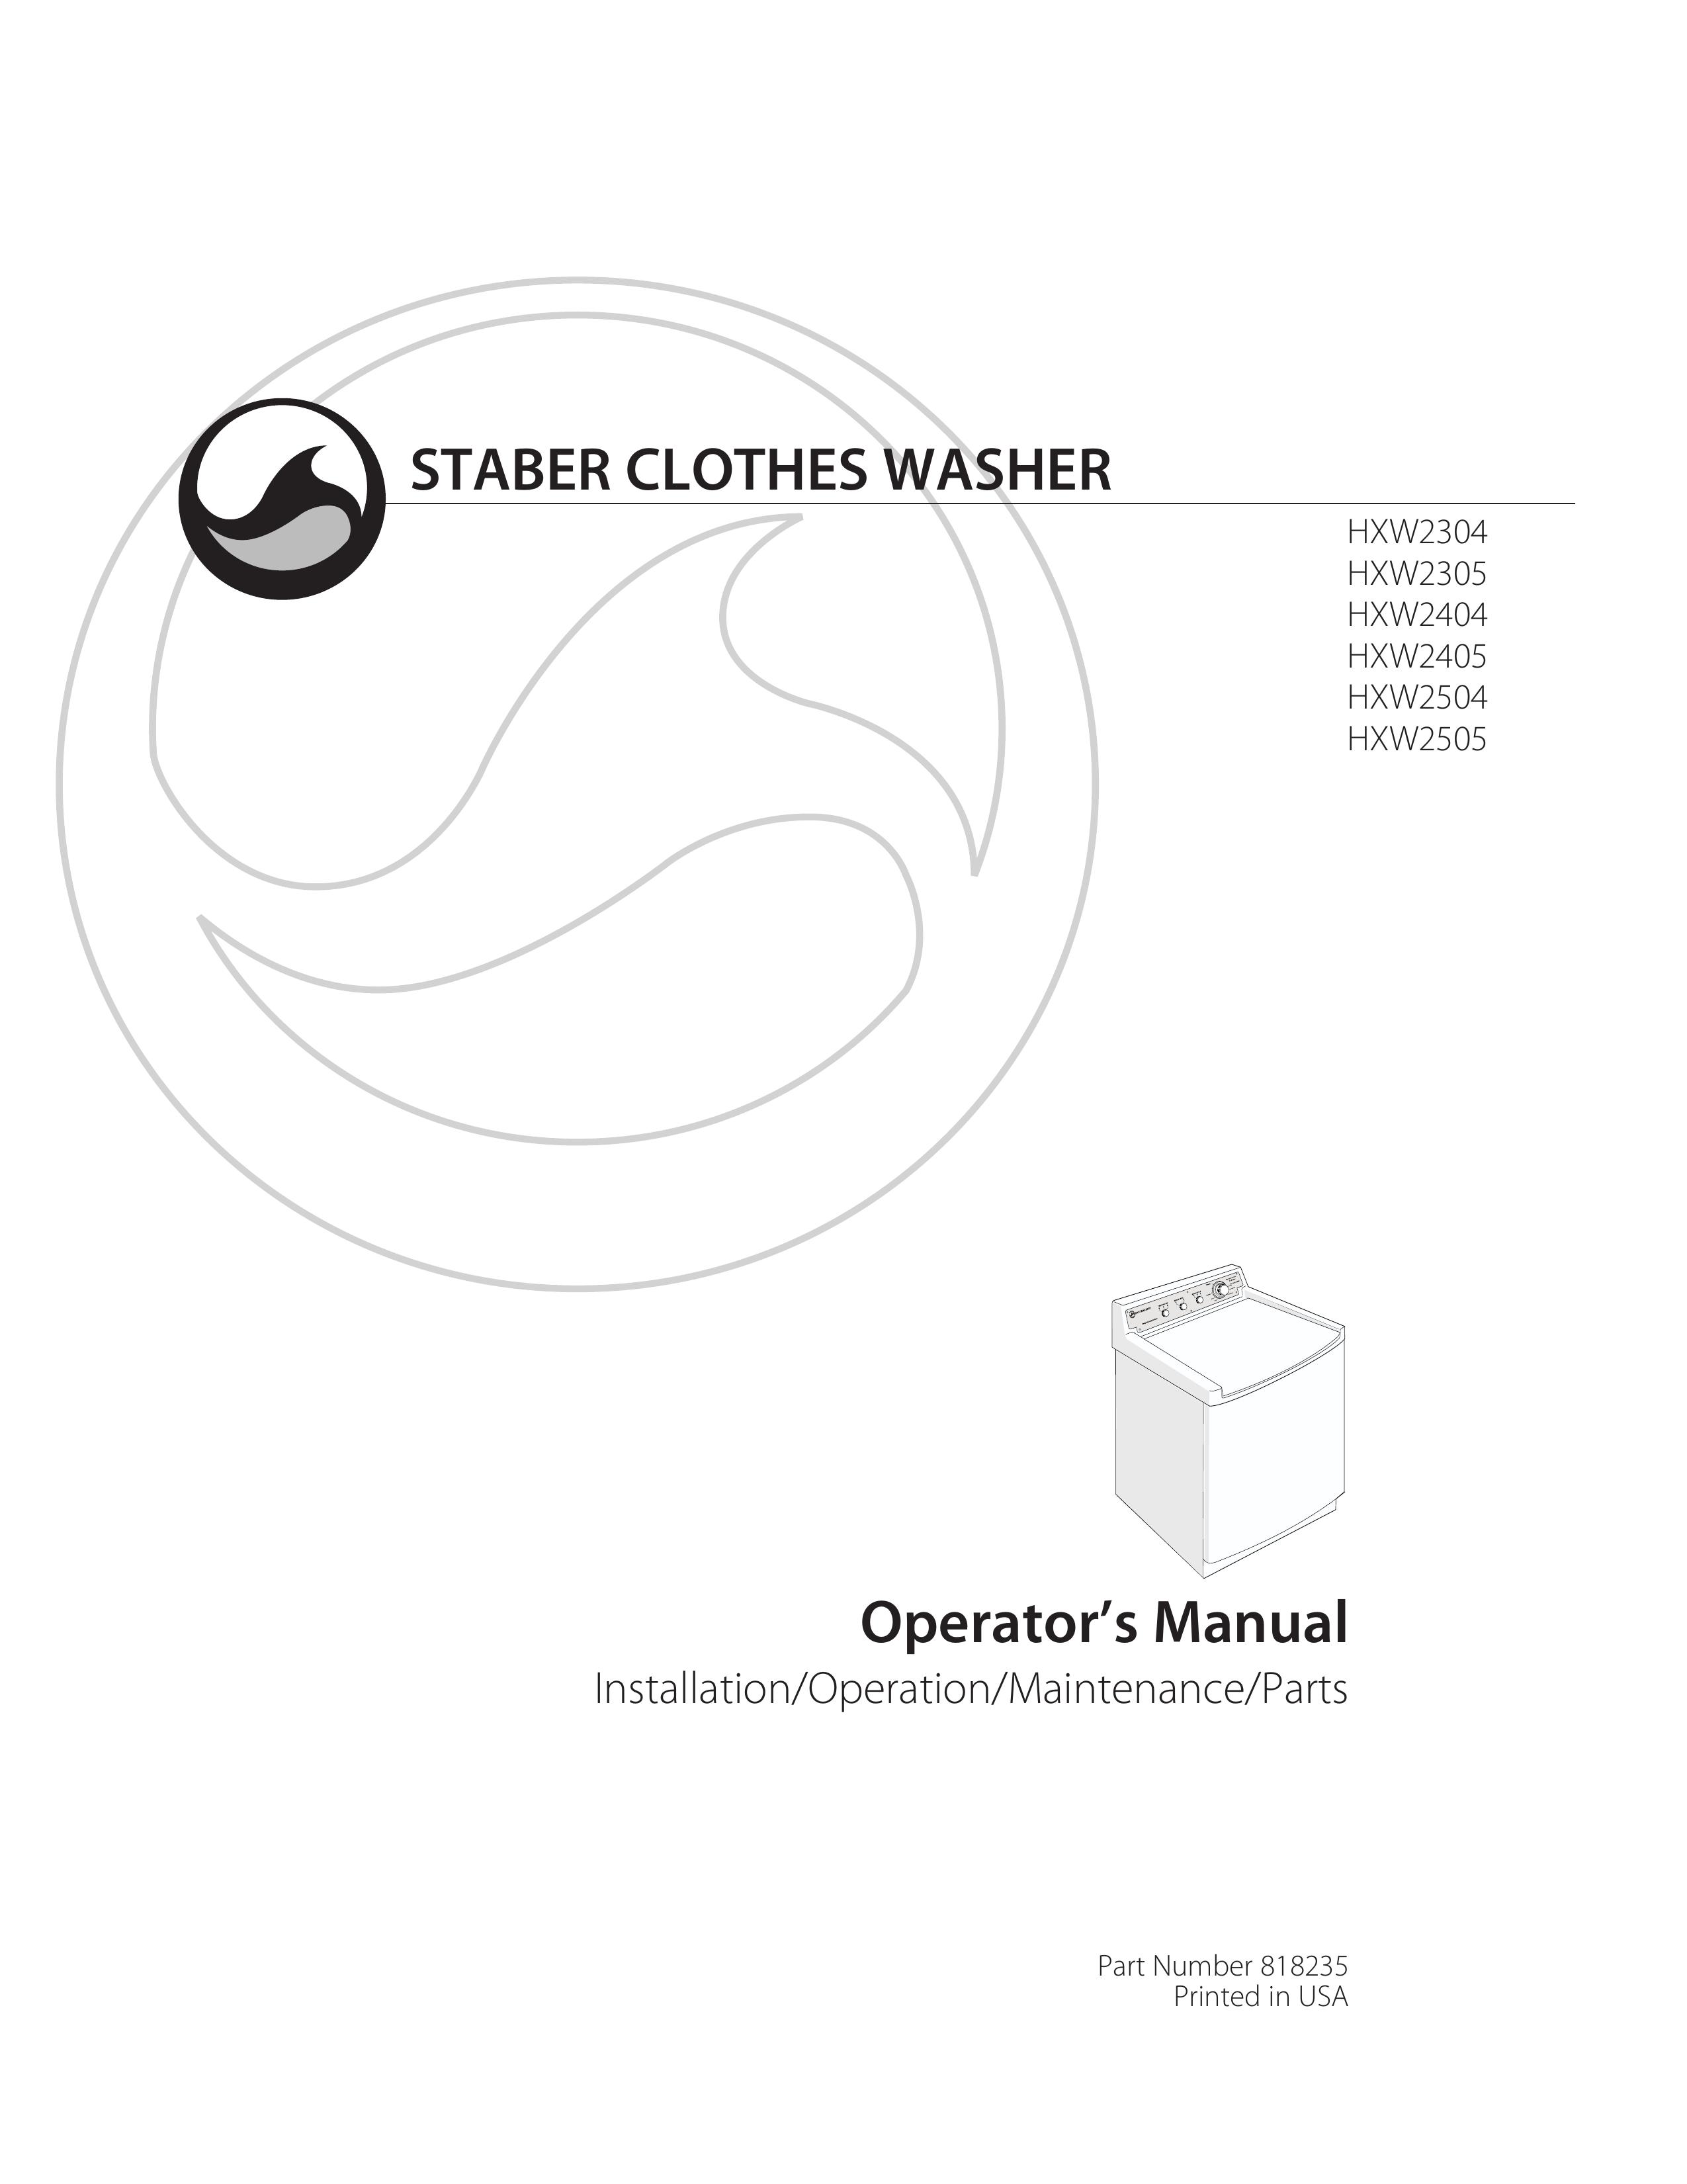 Staber Industries HXW2504 Washer User Manual